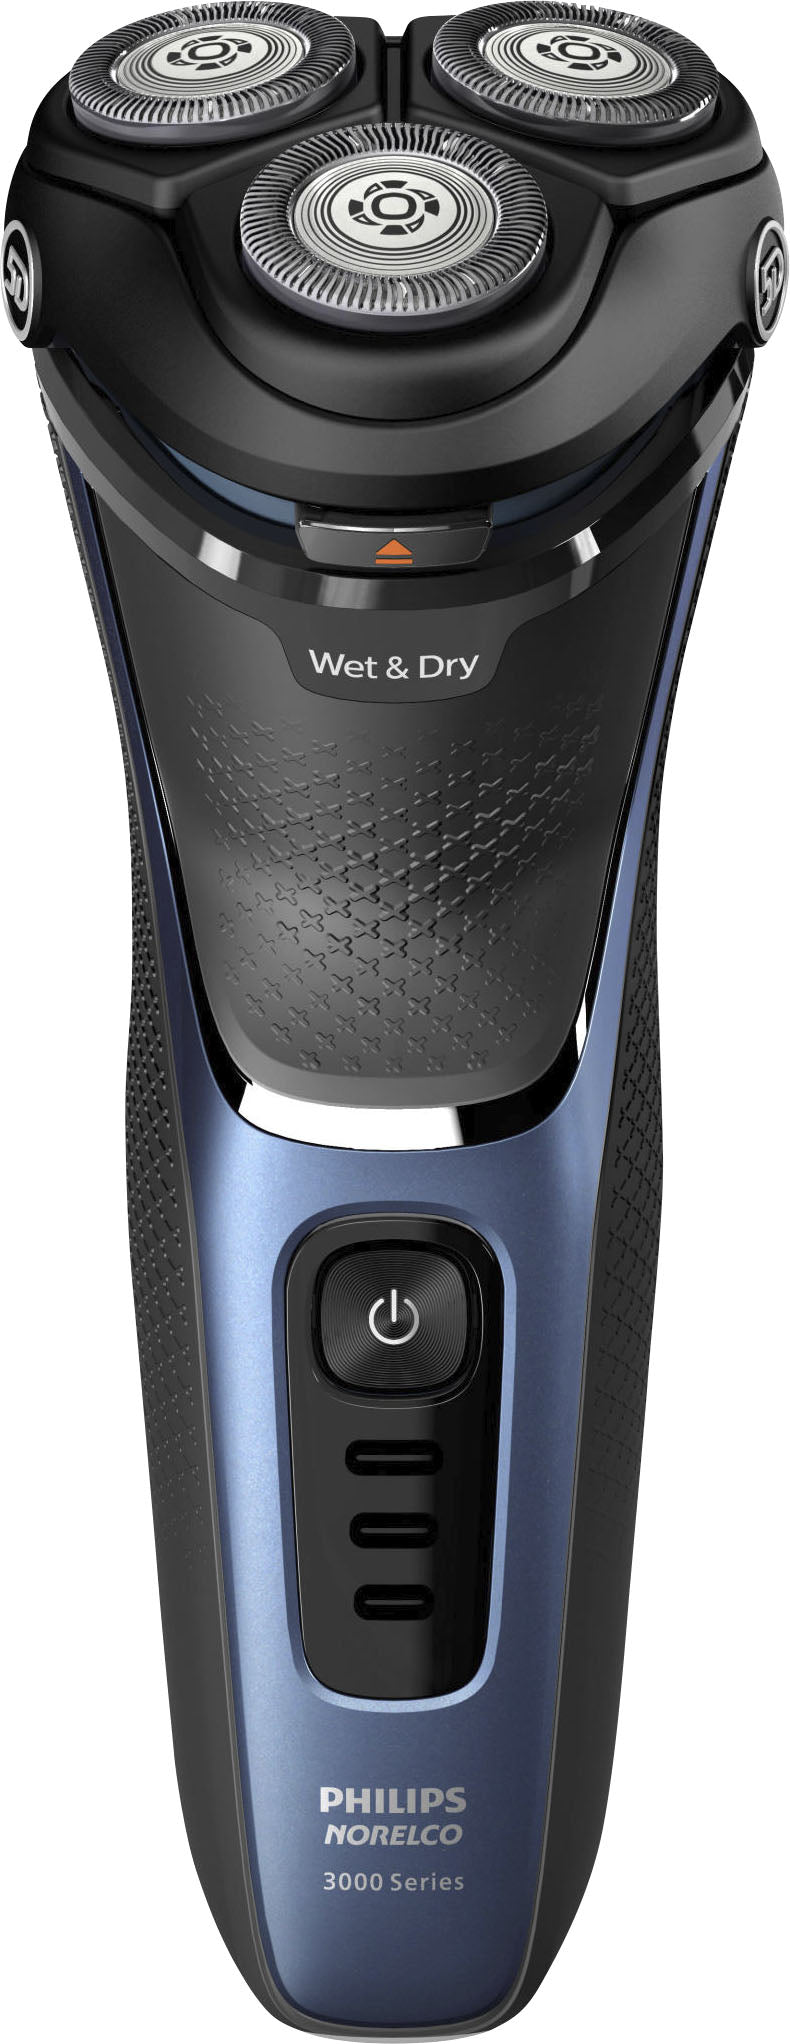 Philips Norelco Shaver 3600, Rechargeable Wet & Dry electric shaver with Pop-Up Trimmer and Storage Pouch - Storm Blue_0